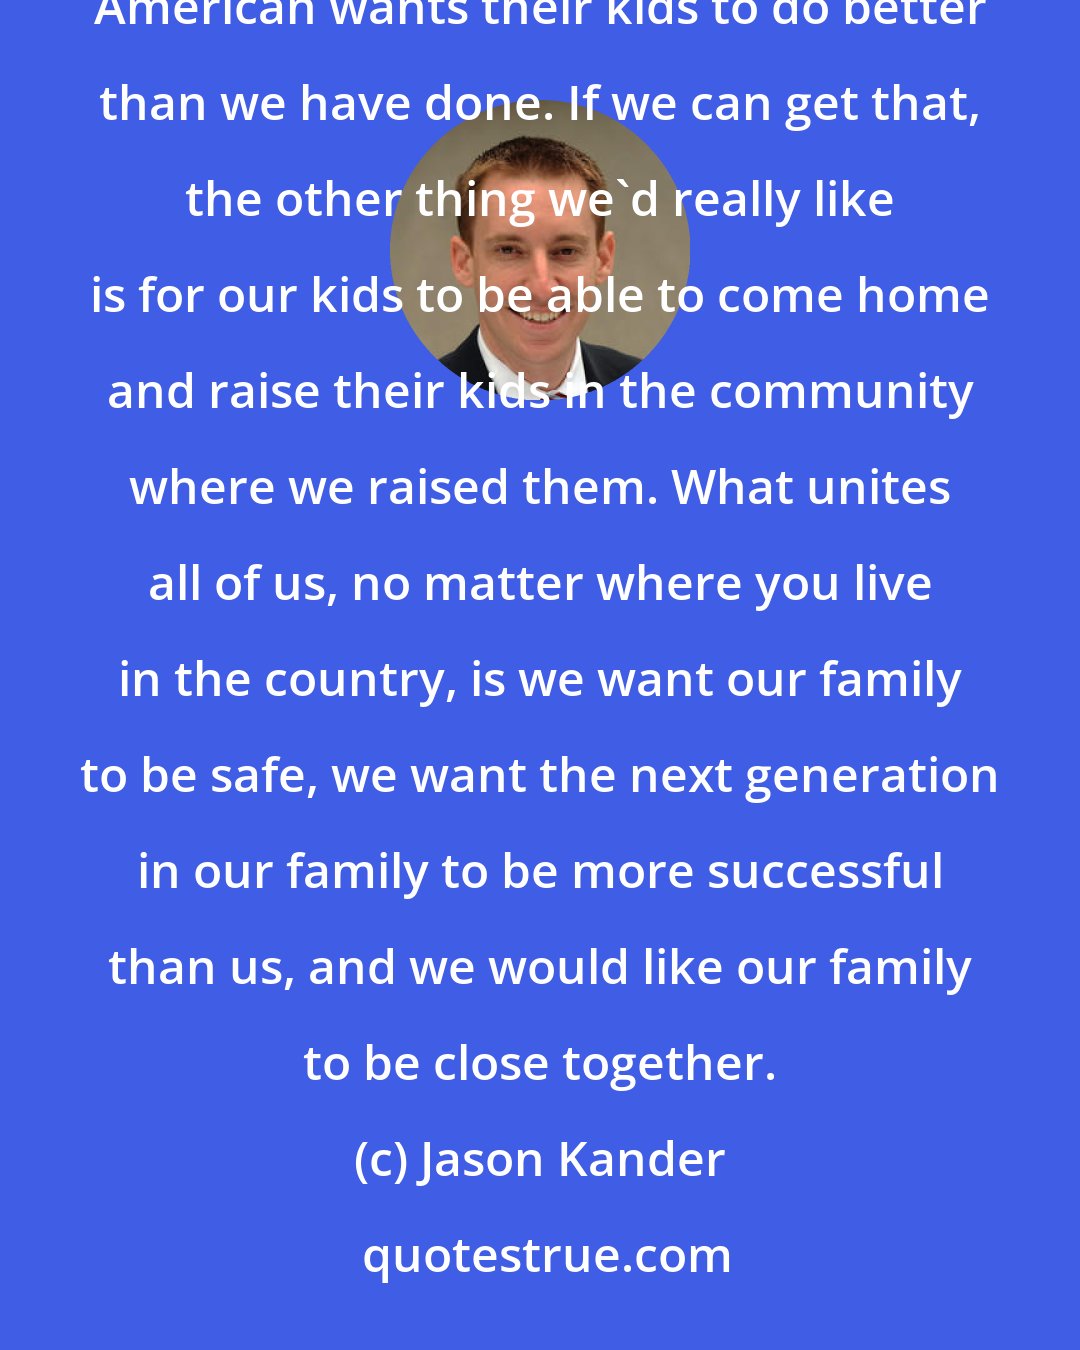 Jason Kander: When we talk about something like student loans, what we should be talking about is the fact that every American wants their kids to do better than we have done. If we can get that, the other thing we'd really like is for our kids to be able to come home and raise their kids in the community where we raised them. What unites all of us, no matter where you live in the country, is we want our family to be safe, we want the next generation in our family to be more successful than us, and we would like our family to be close together.